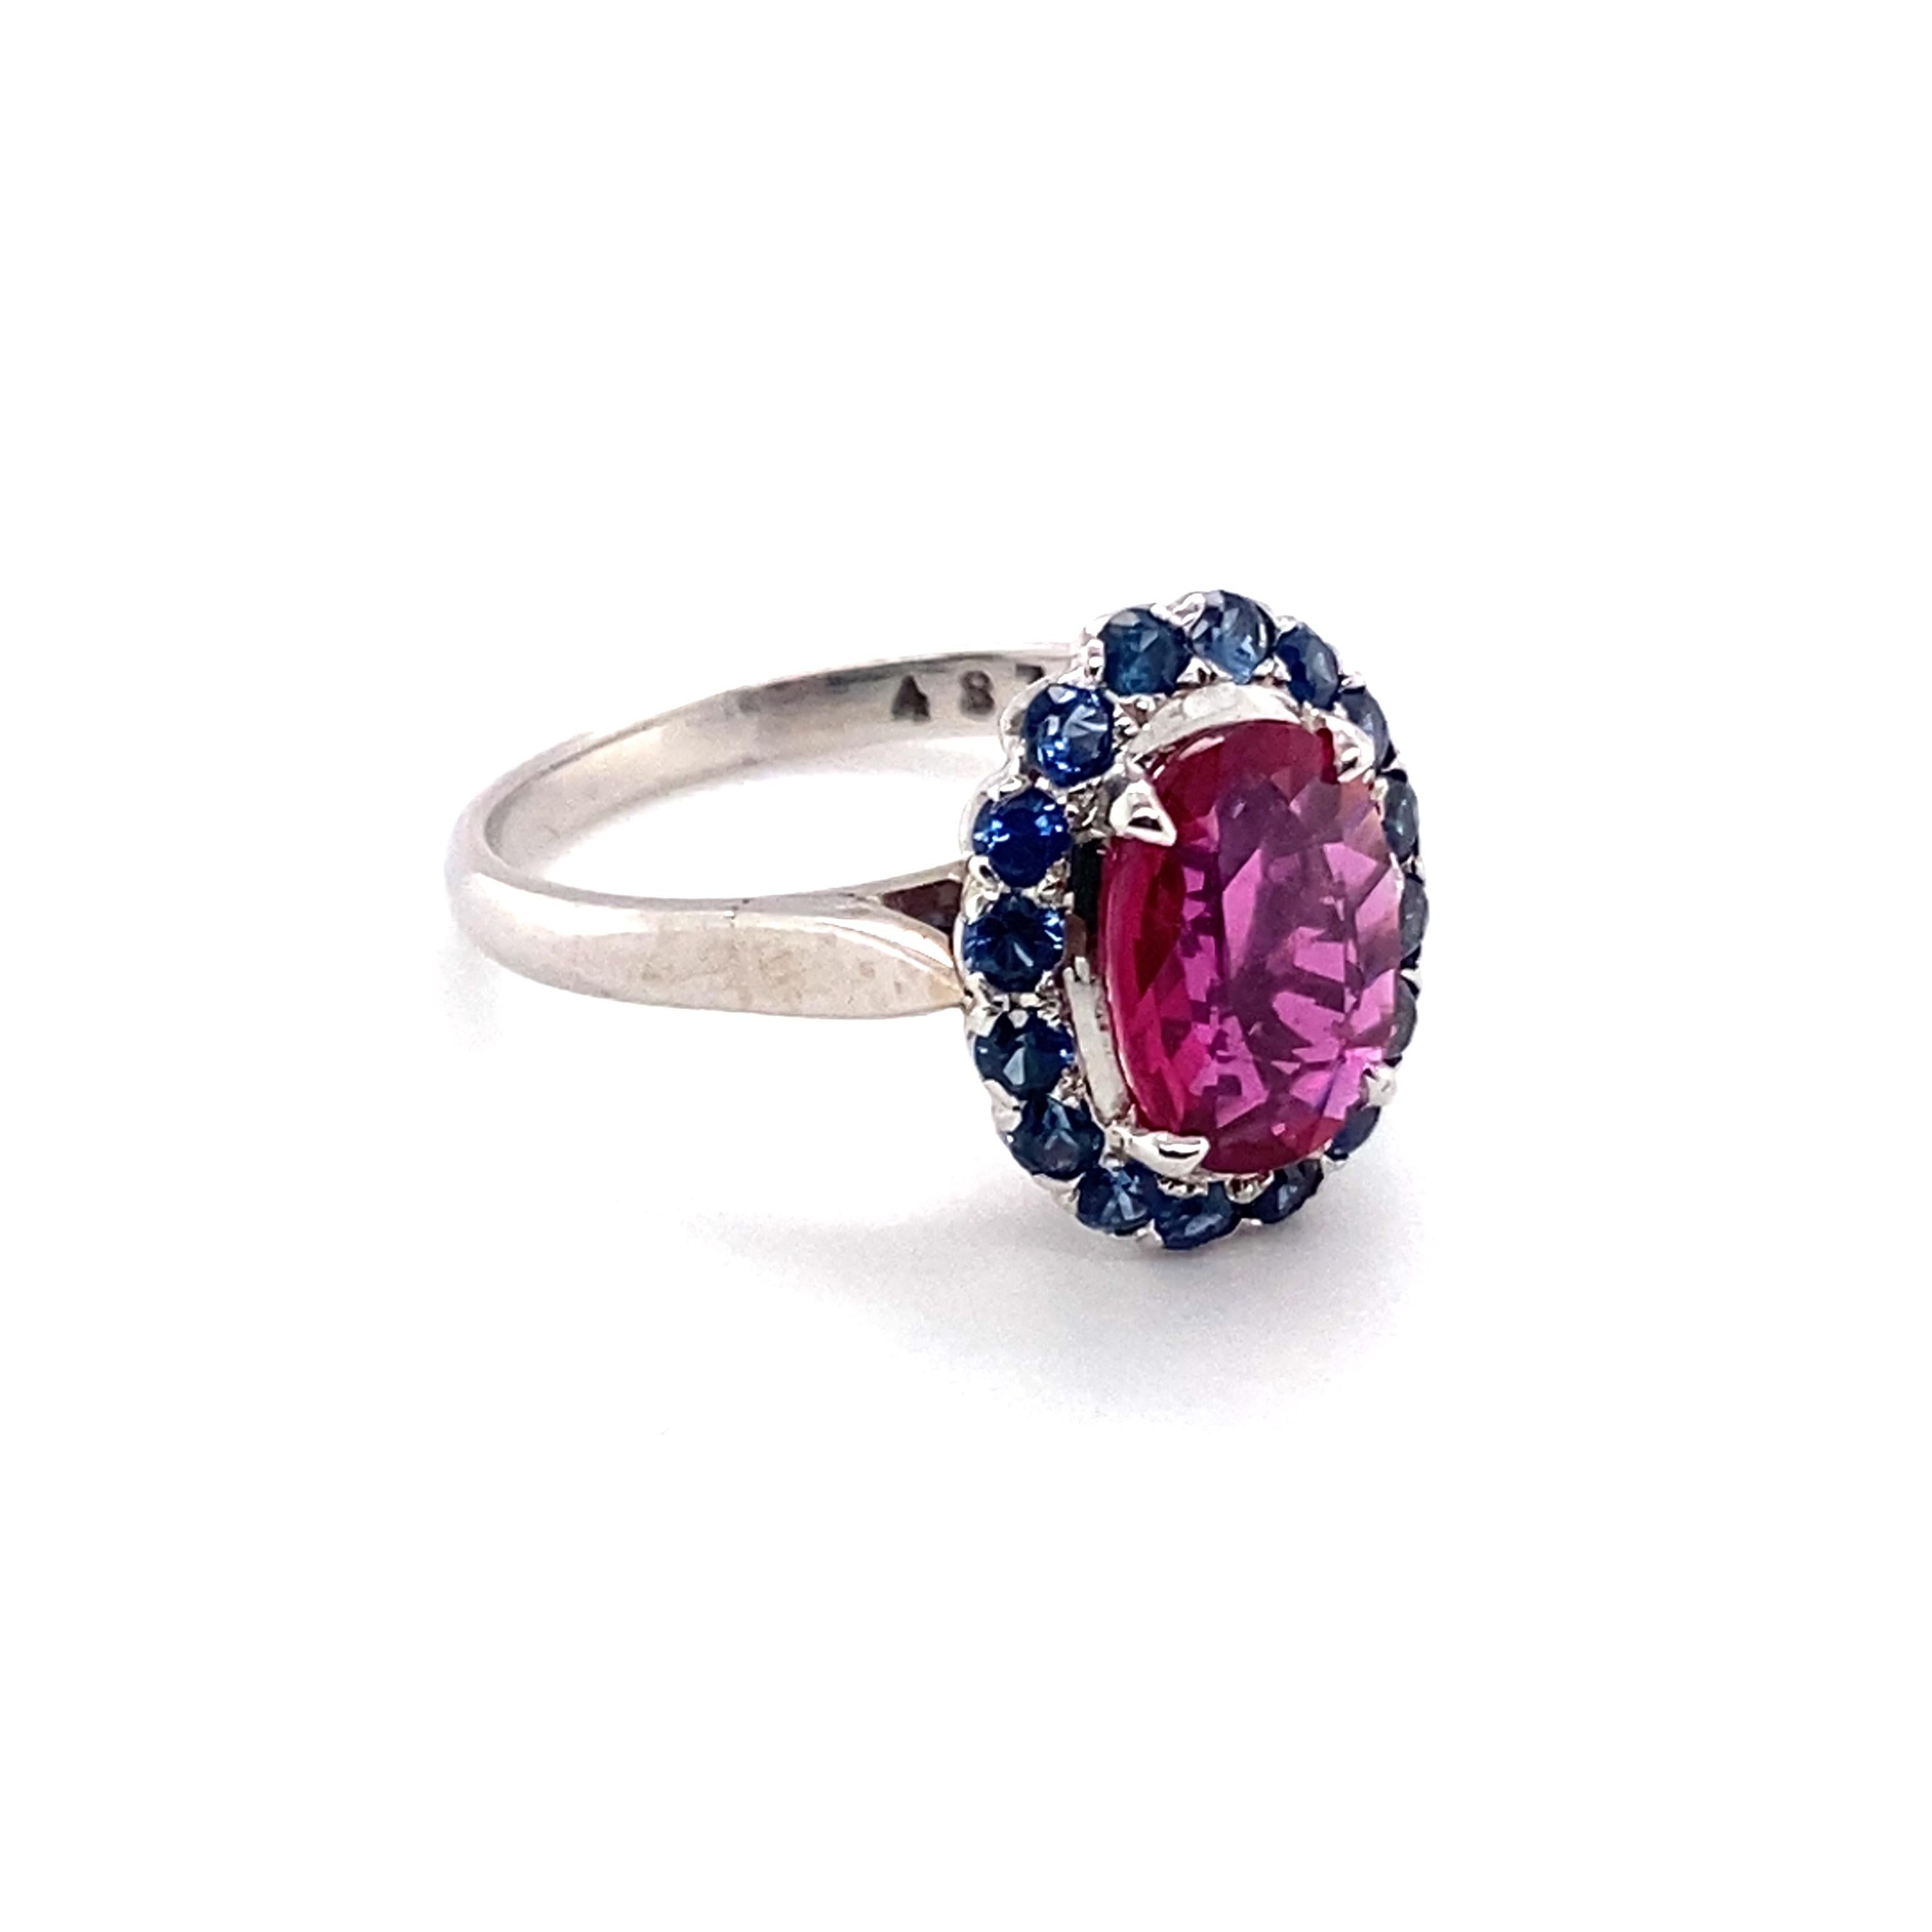 Item Details:
Size: 6.75, can be resized
Metal: 14 Karat White Gold
Weight: 3.9 grams

Ruby Details:
Carat: 1.56 carat total weight
Cut: Oval
Color: Red

Sapphire Details:
Cut: Round
Carat: 1.14 carat total weight
Color: Blue

Item Features:
This